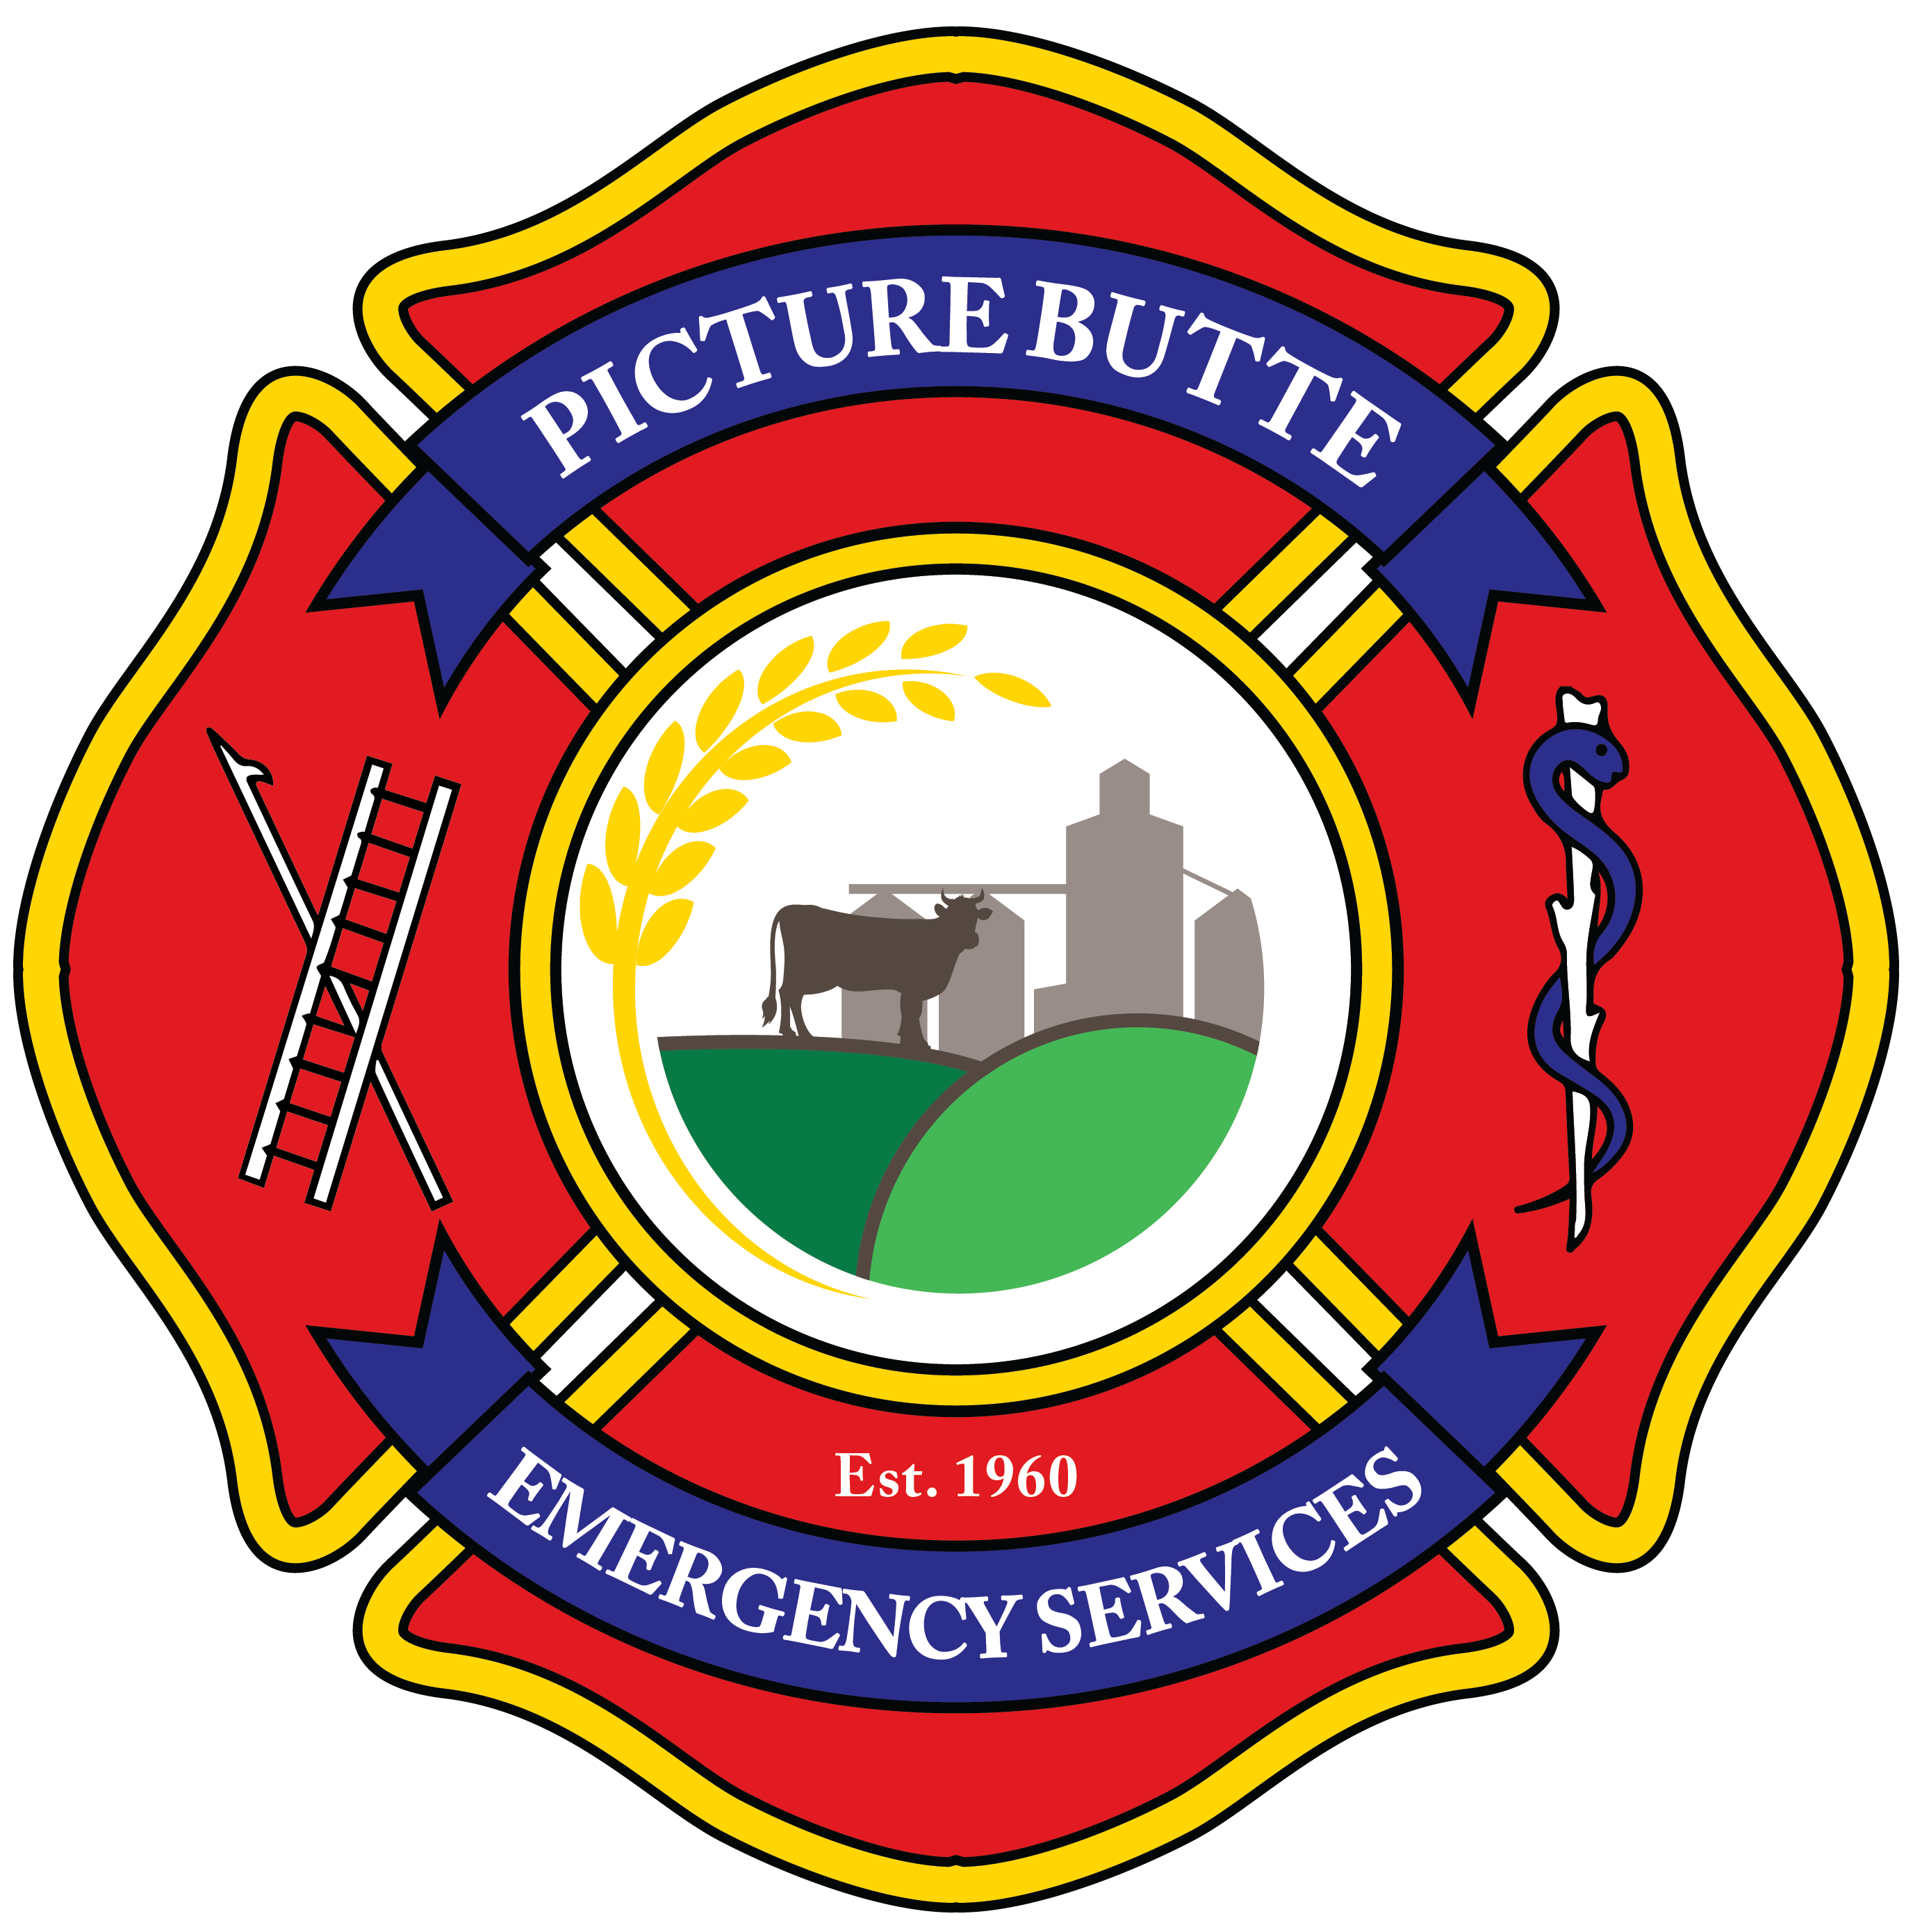 Picture Butte & District Emergency Services Crest